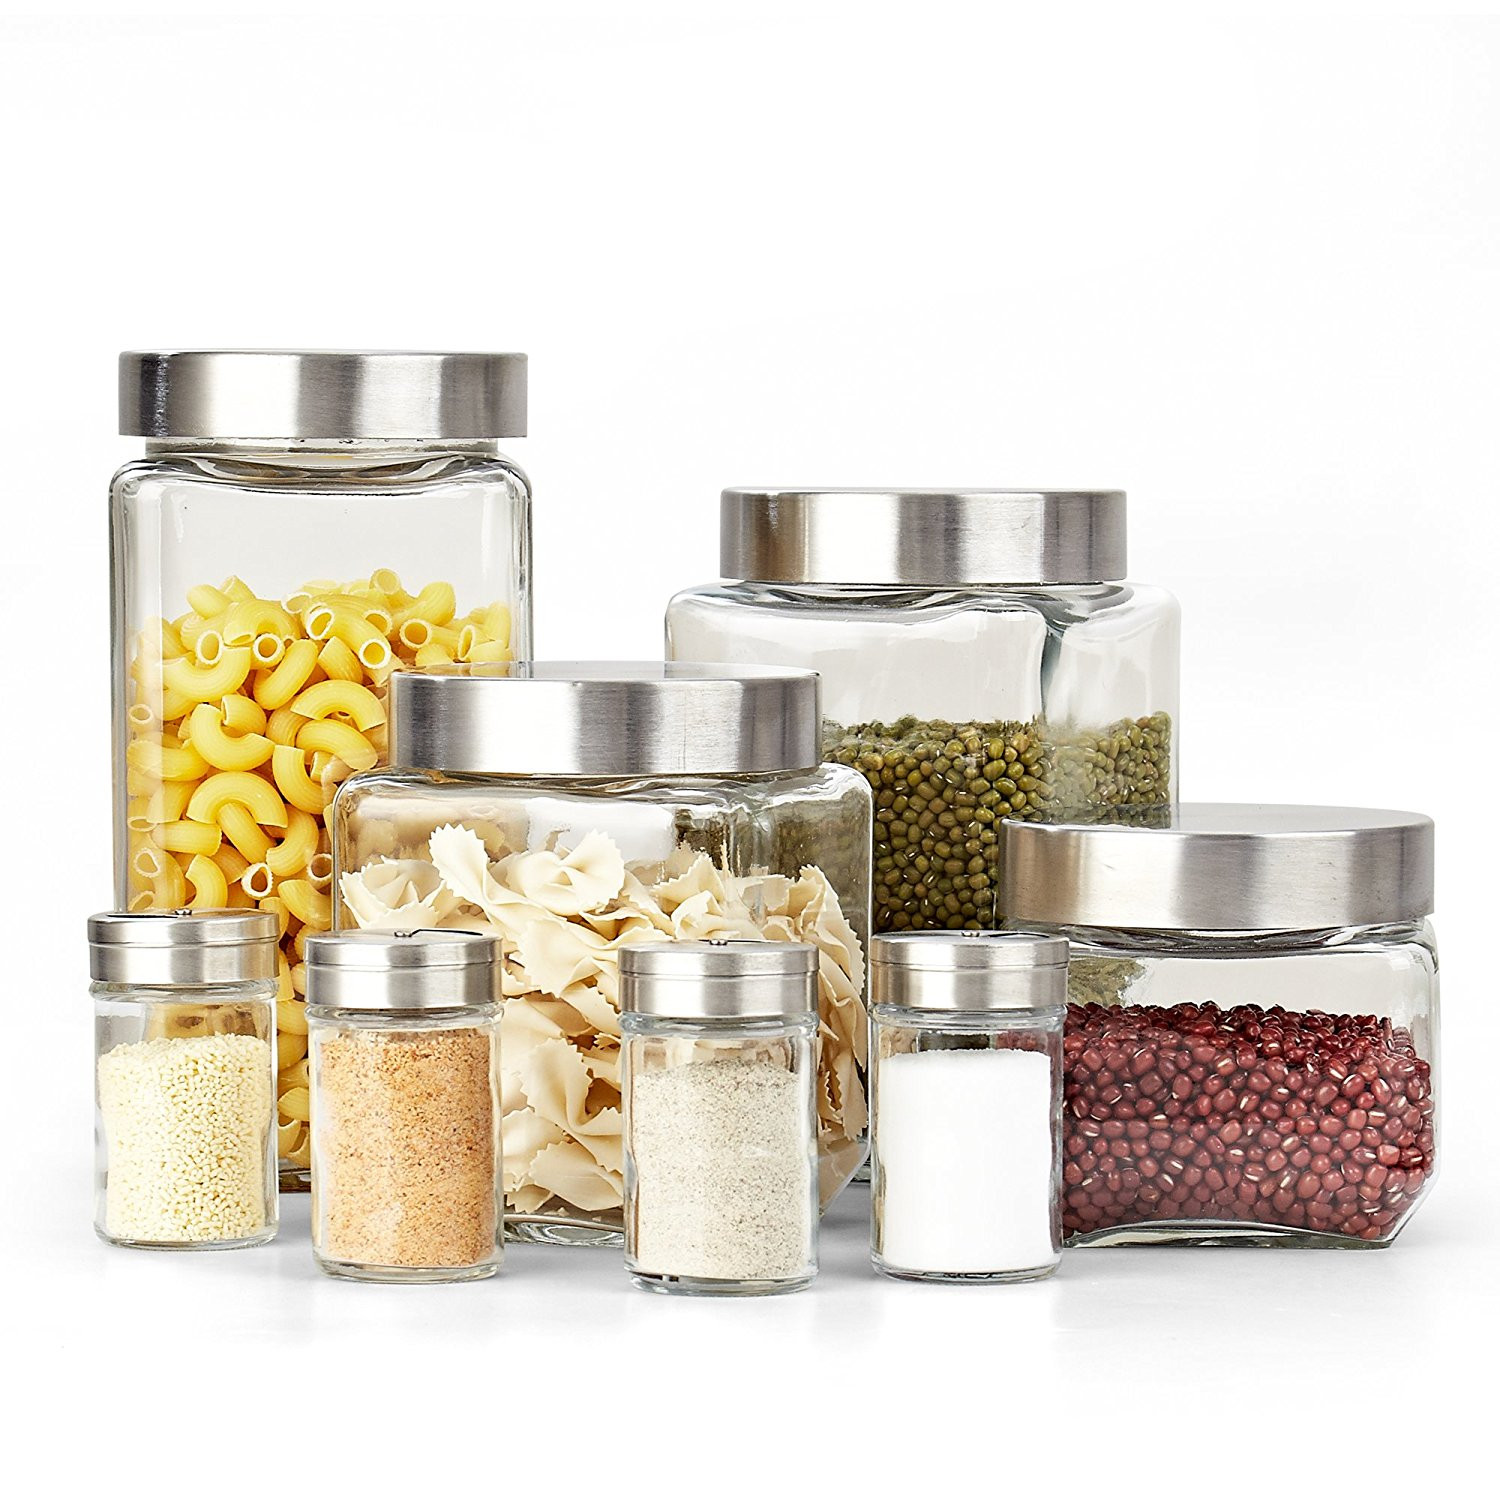 Kitchen Storage Containers Glass
 Glass Canister Set with Spice Jars Metal Lids Kitchen Food